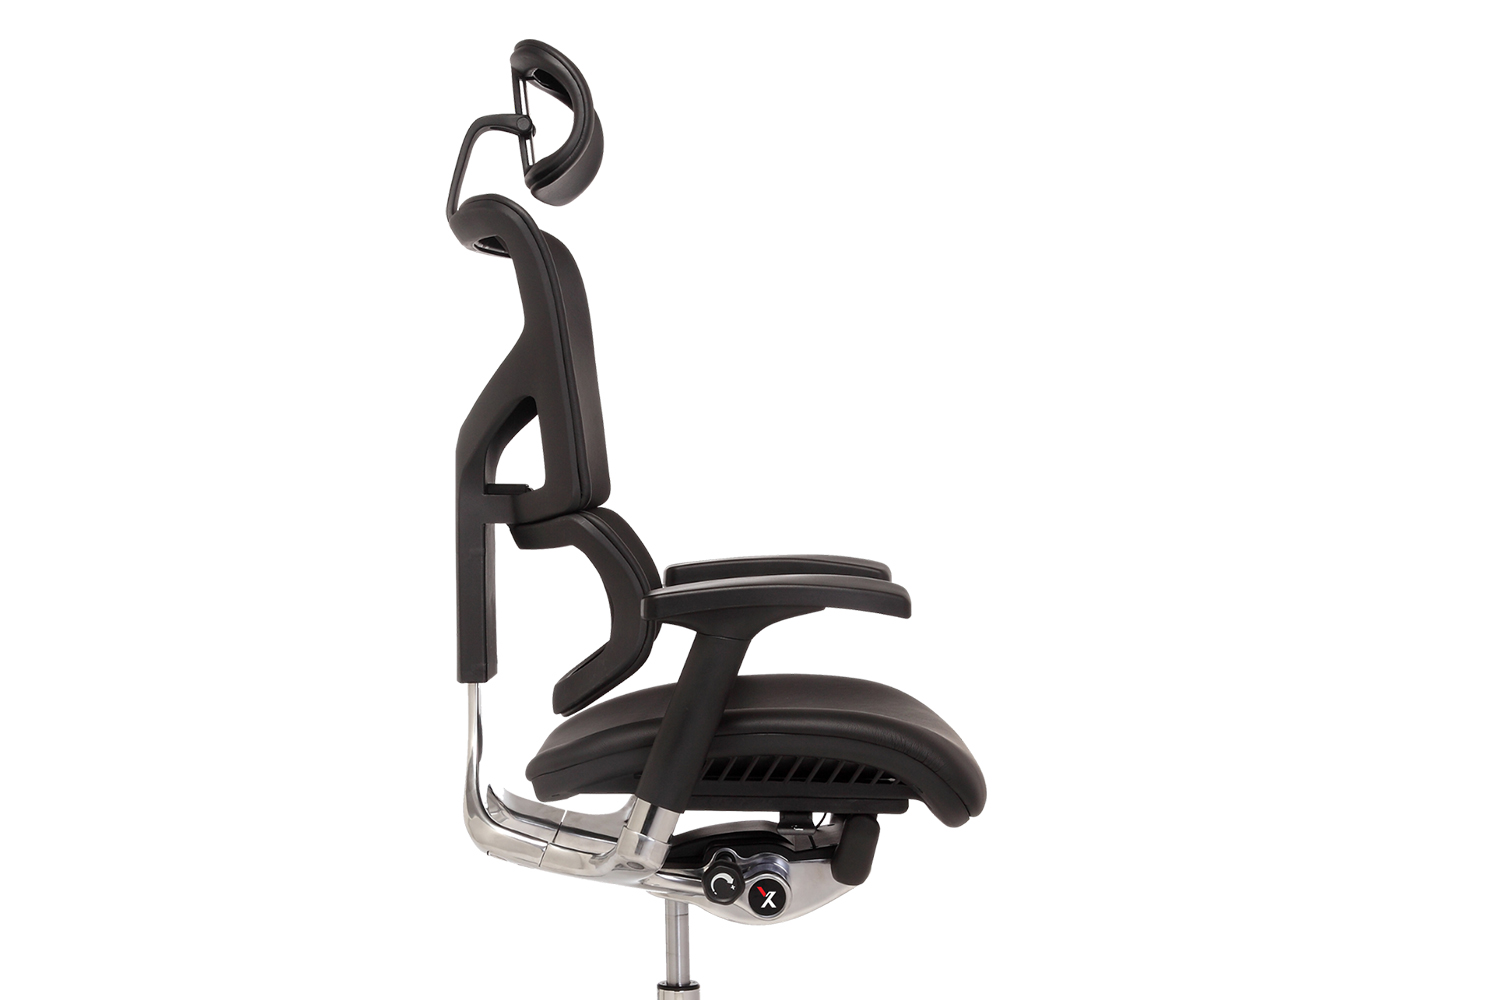 Office chair brand X-Chair launched a new product the X3